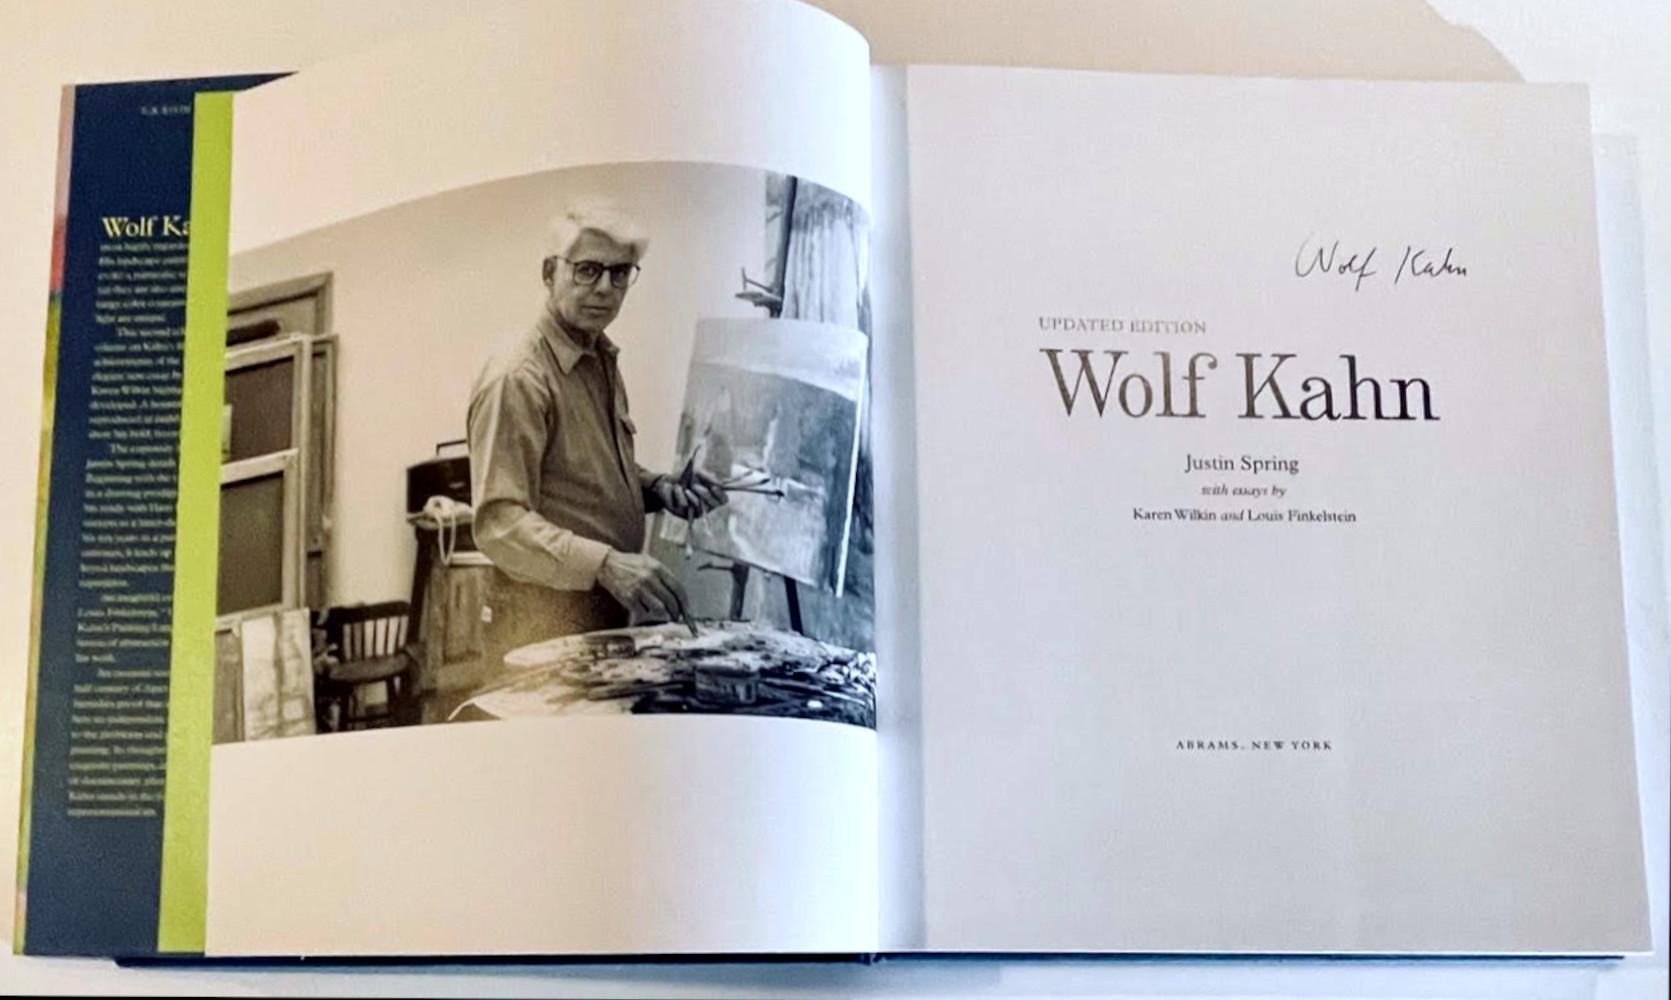 Hardback monograph with dust jacket: Wolf Kahn (hand signed by Wolf Kahn) For Sale 10